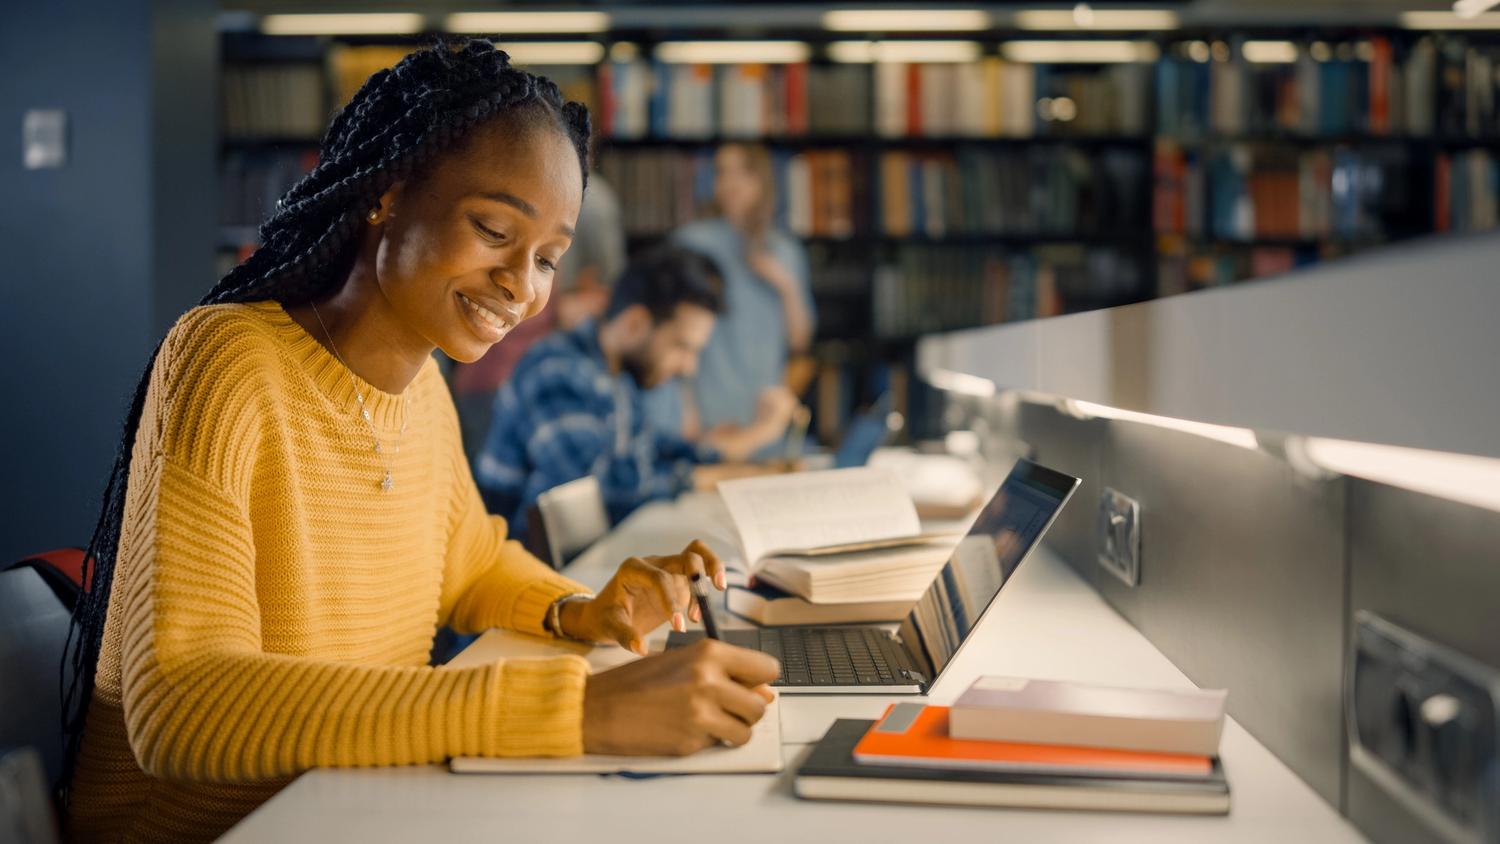 University Library: Gifted Black Girl uses Laptop, Writes Notes for the Paper, Essay, Study for Class Assignment.